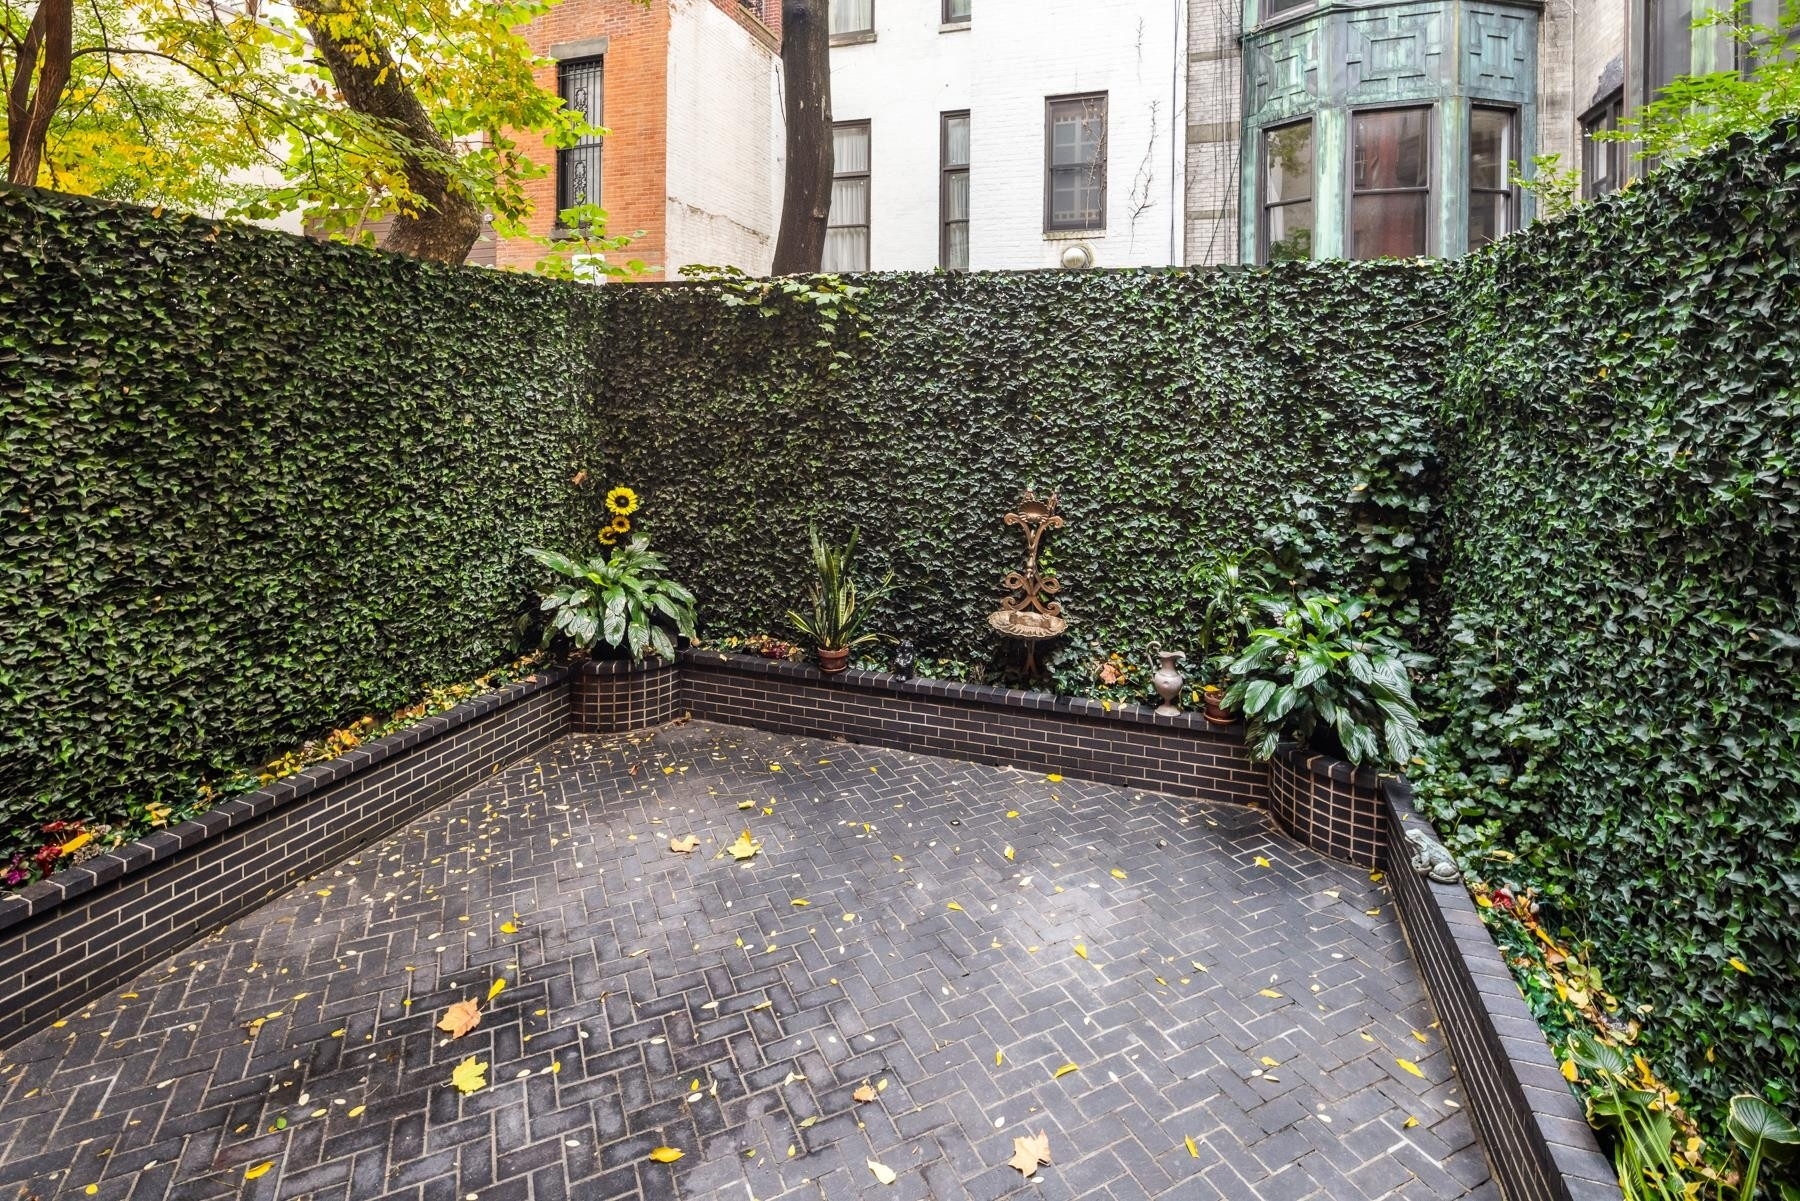 28. Single Family Townhouse for Sale at 10 E 64TH ST, TOWNHOUSE Lenox Hill, New York, New York 10065